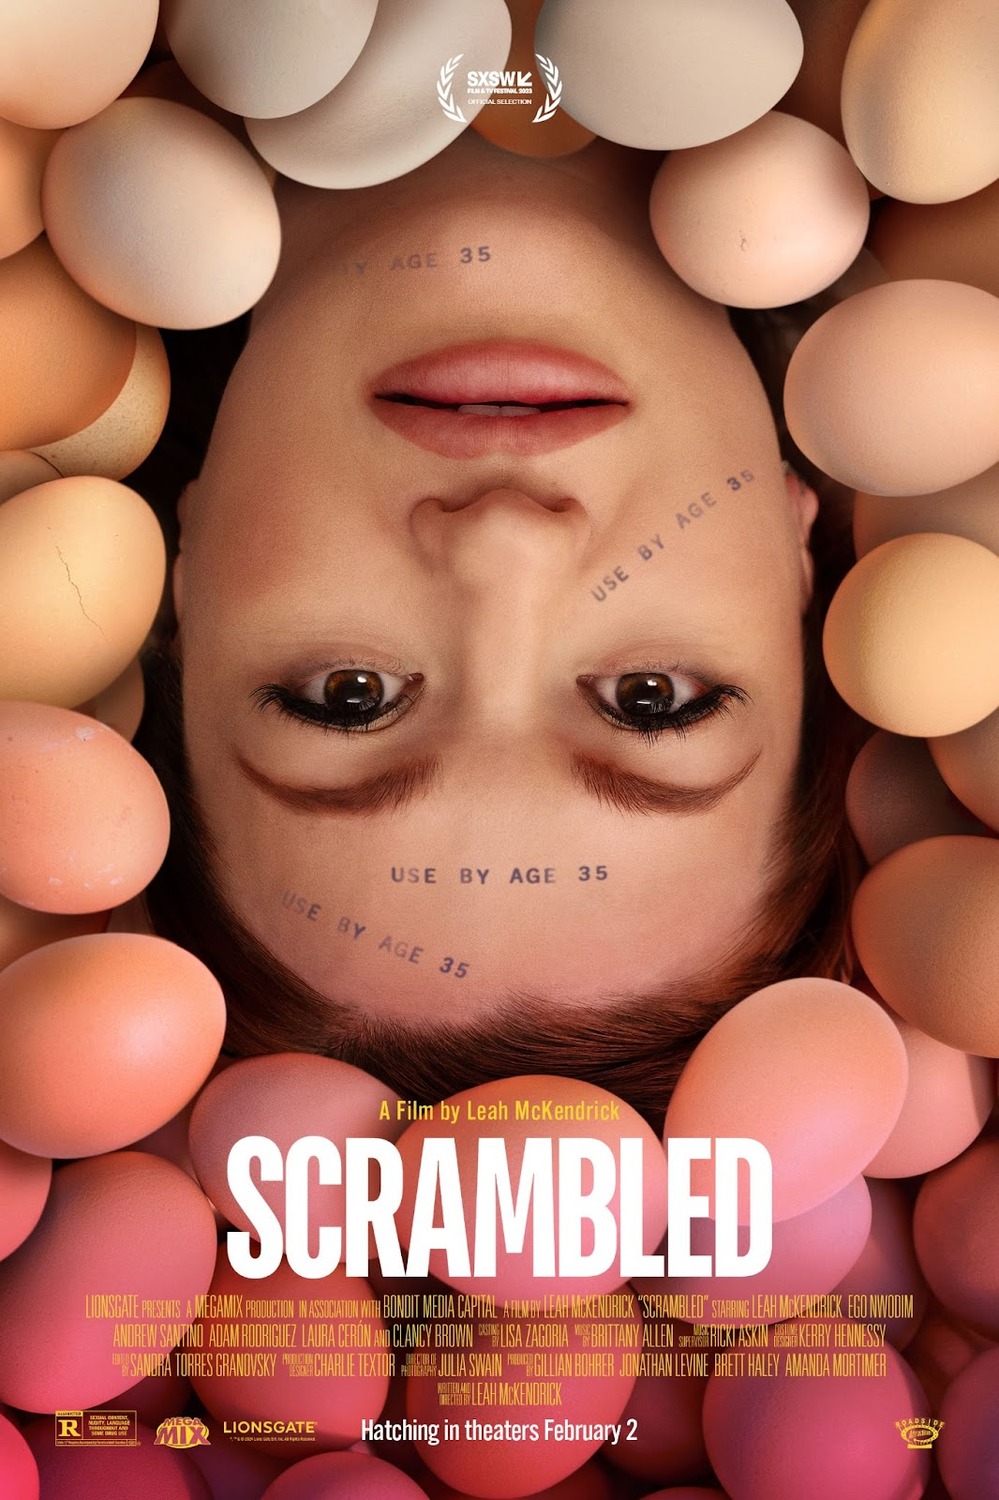 Scrambled Review — An empowering journey of self growth